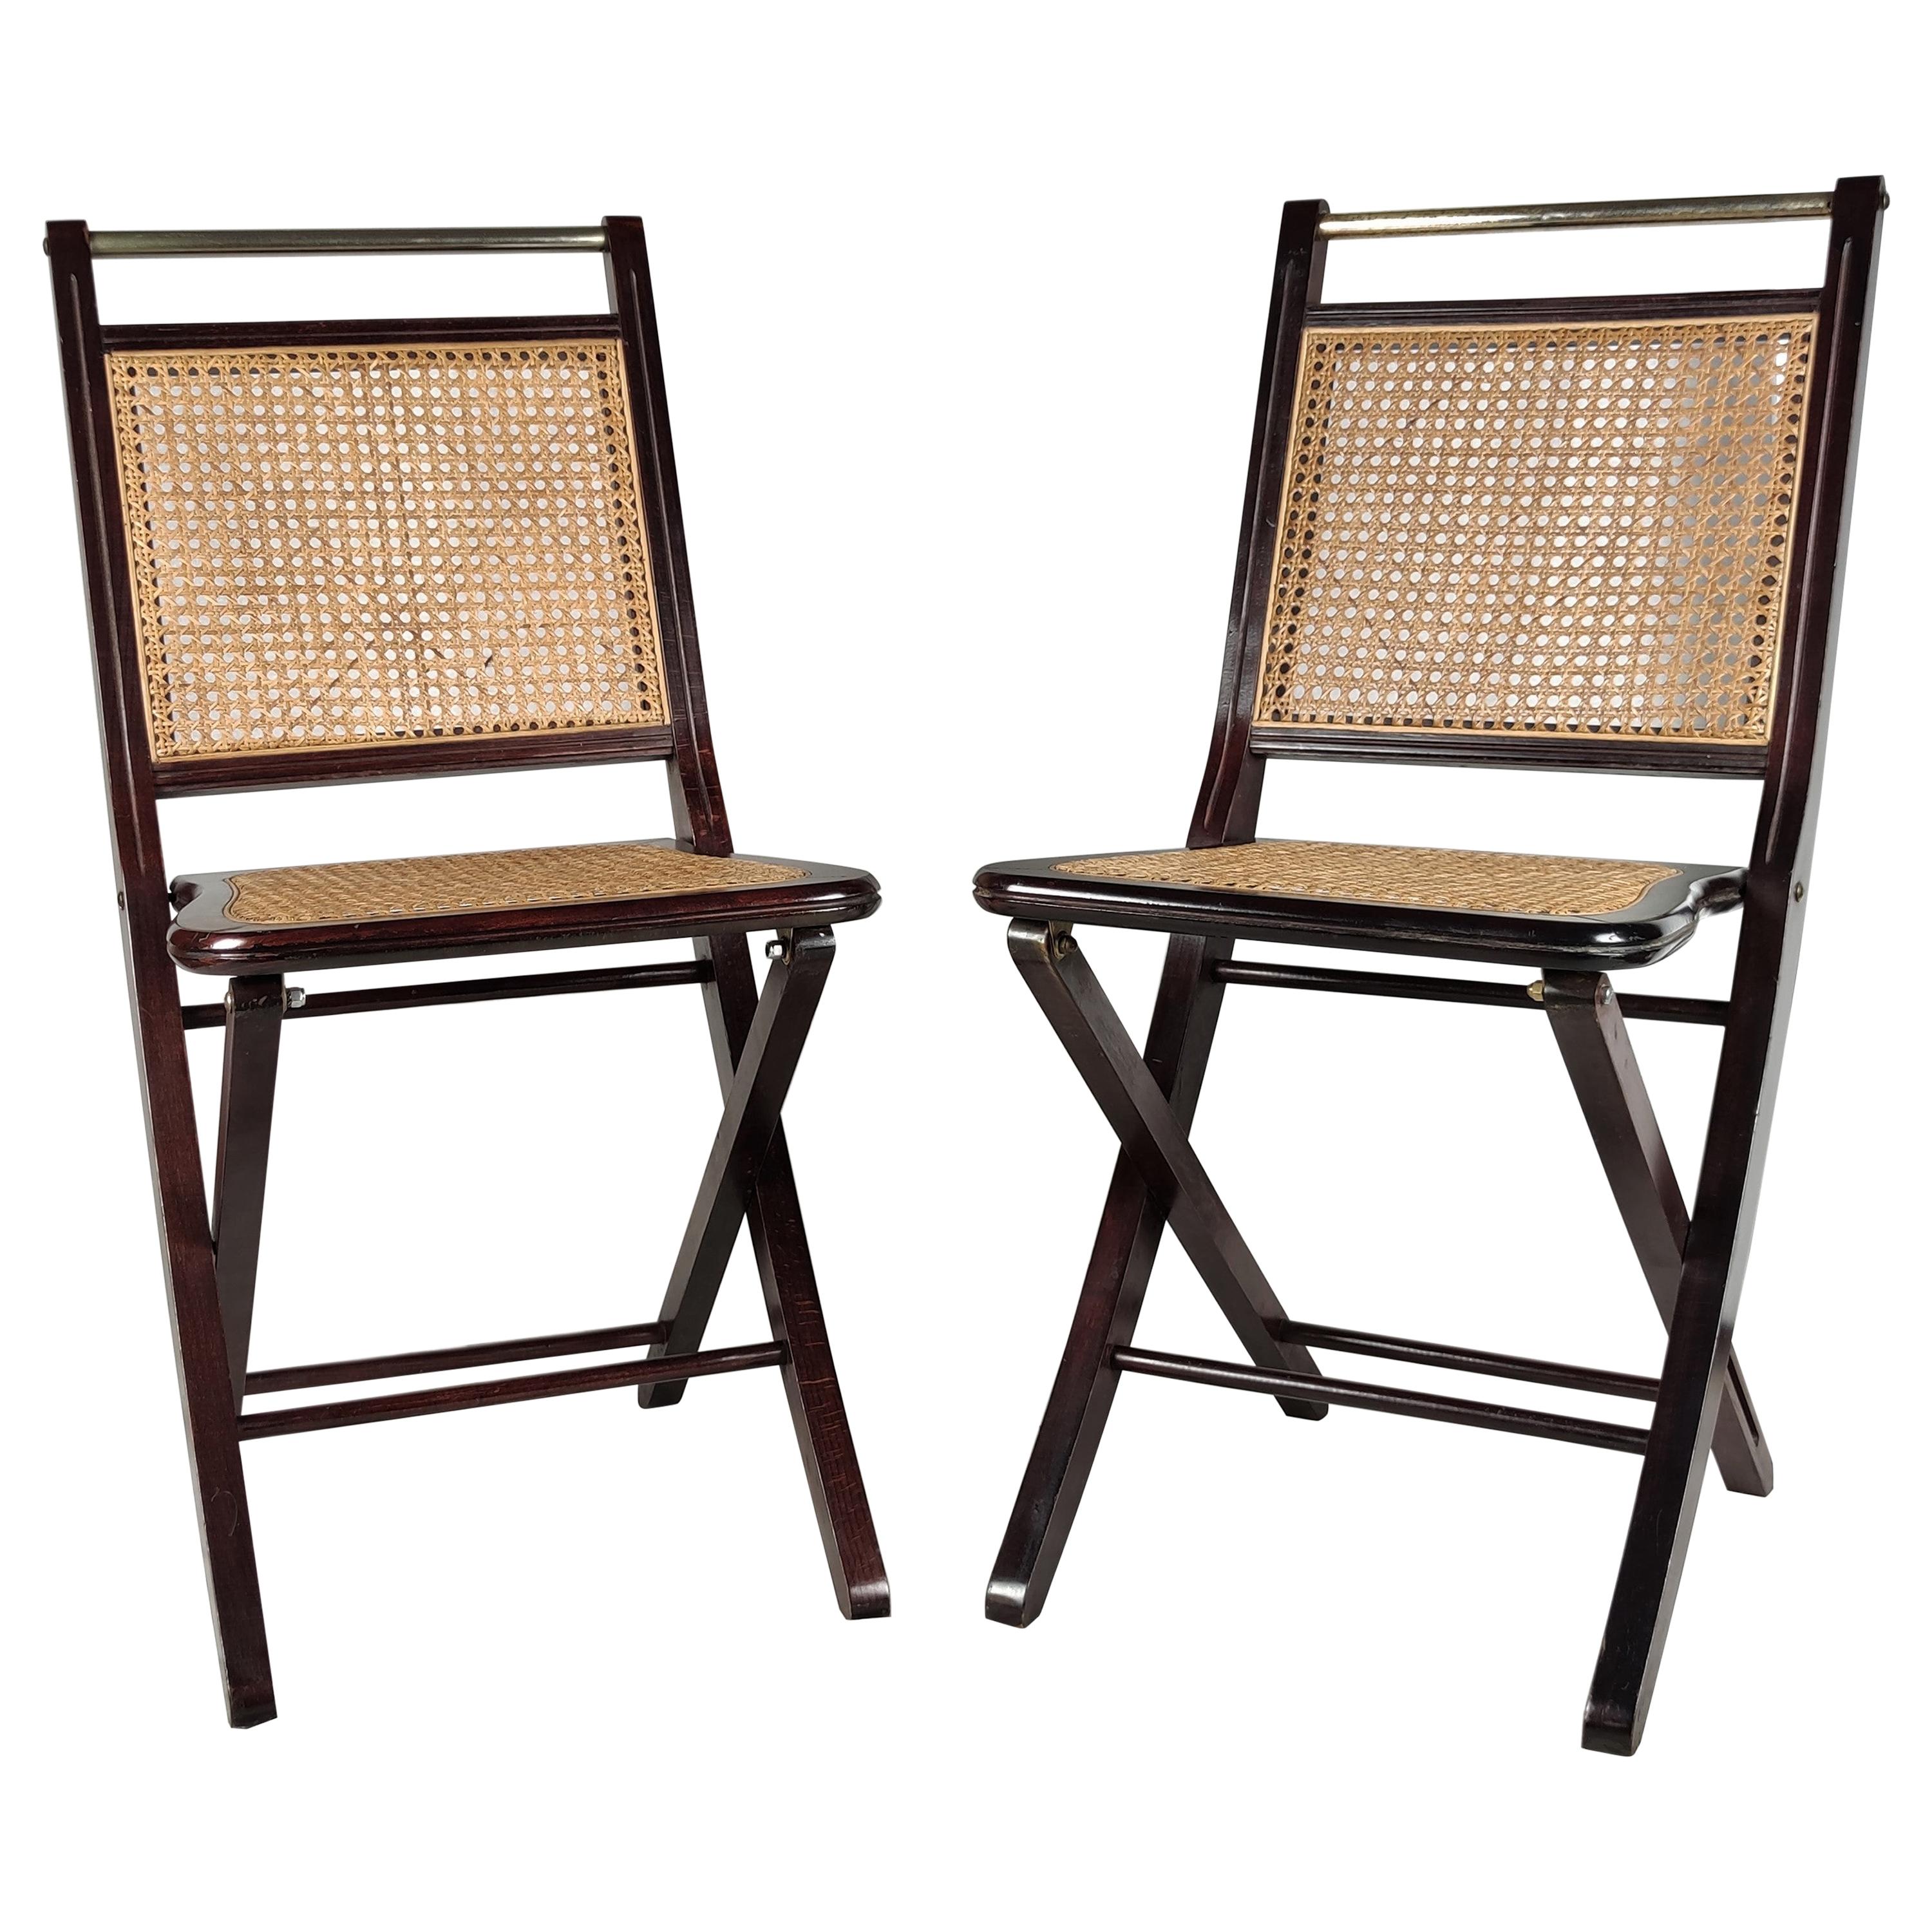 Pair of Italian Midcentury Wood, Brass and Rattan Folding Chairs